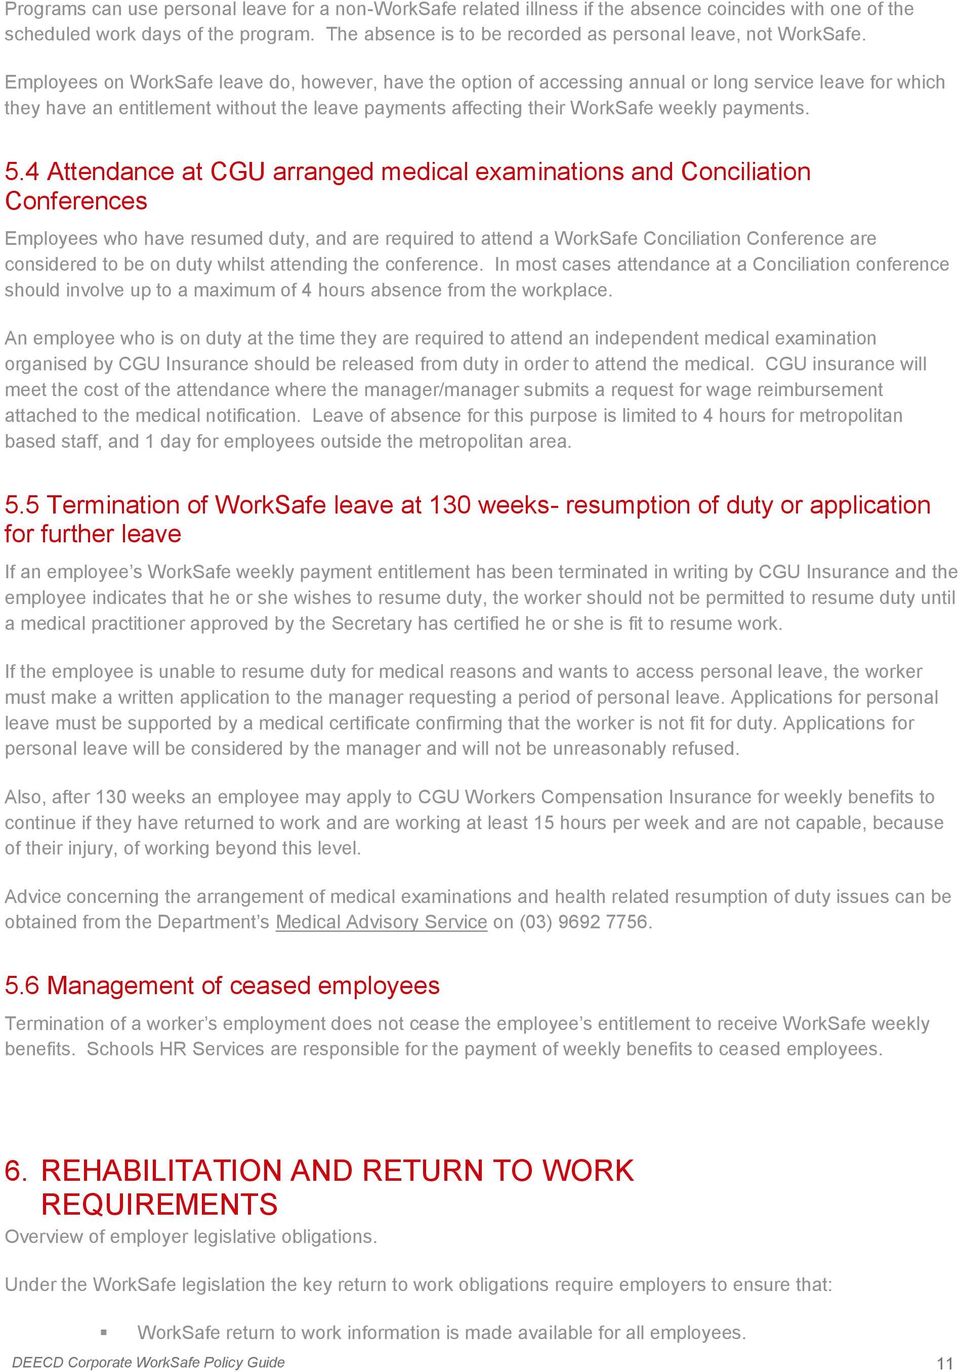 Employees on WorkSafe leave do, however, have the option of accessing annual or long service leave for which they have an entitlement without the leave payments affecting their WorkSafe weekly